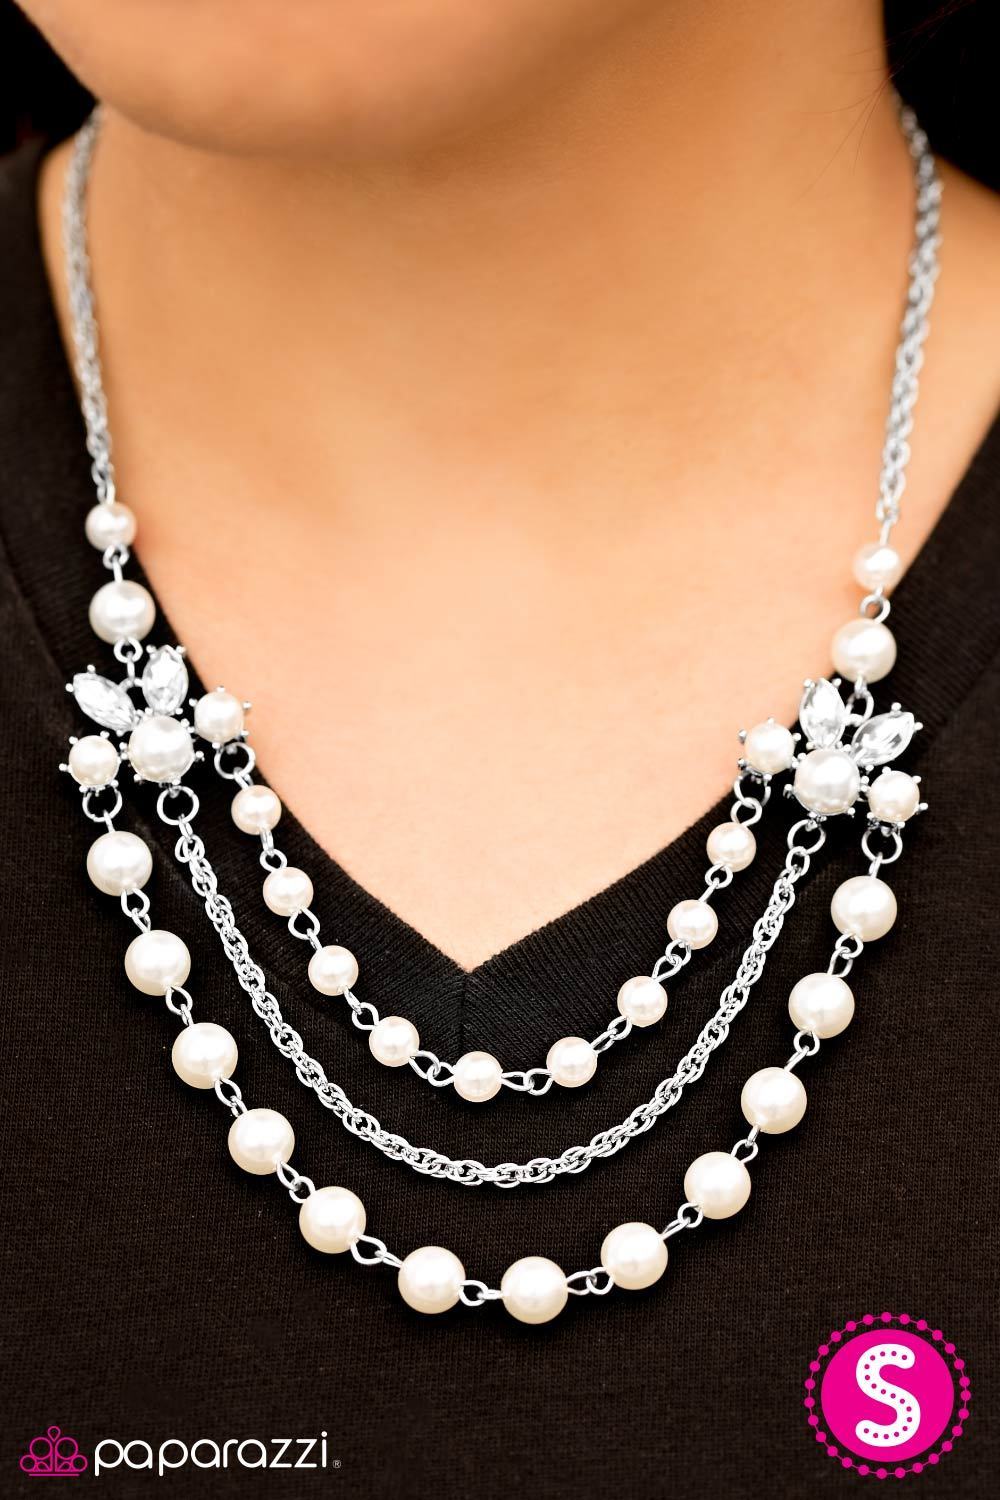 Miss Magnificent White Pearl Necklace and matching Earrings - Paparazzi Accessories-CarasShop.com - $5 Jewelry by Cara Jewels